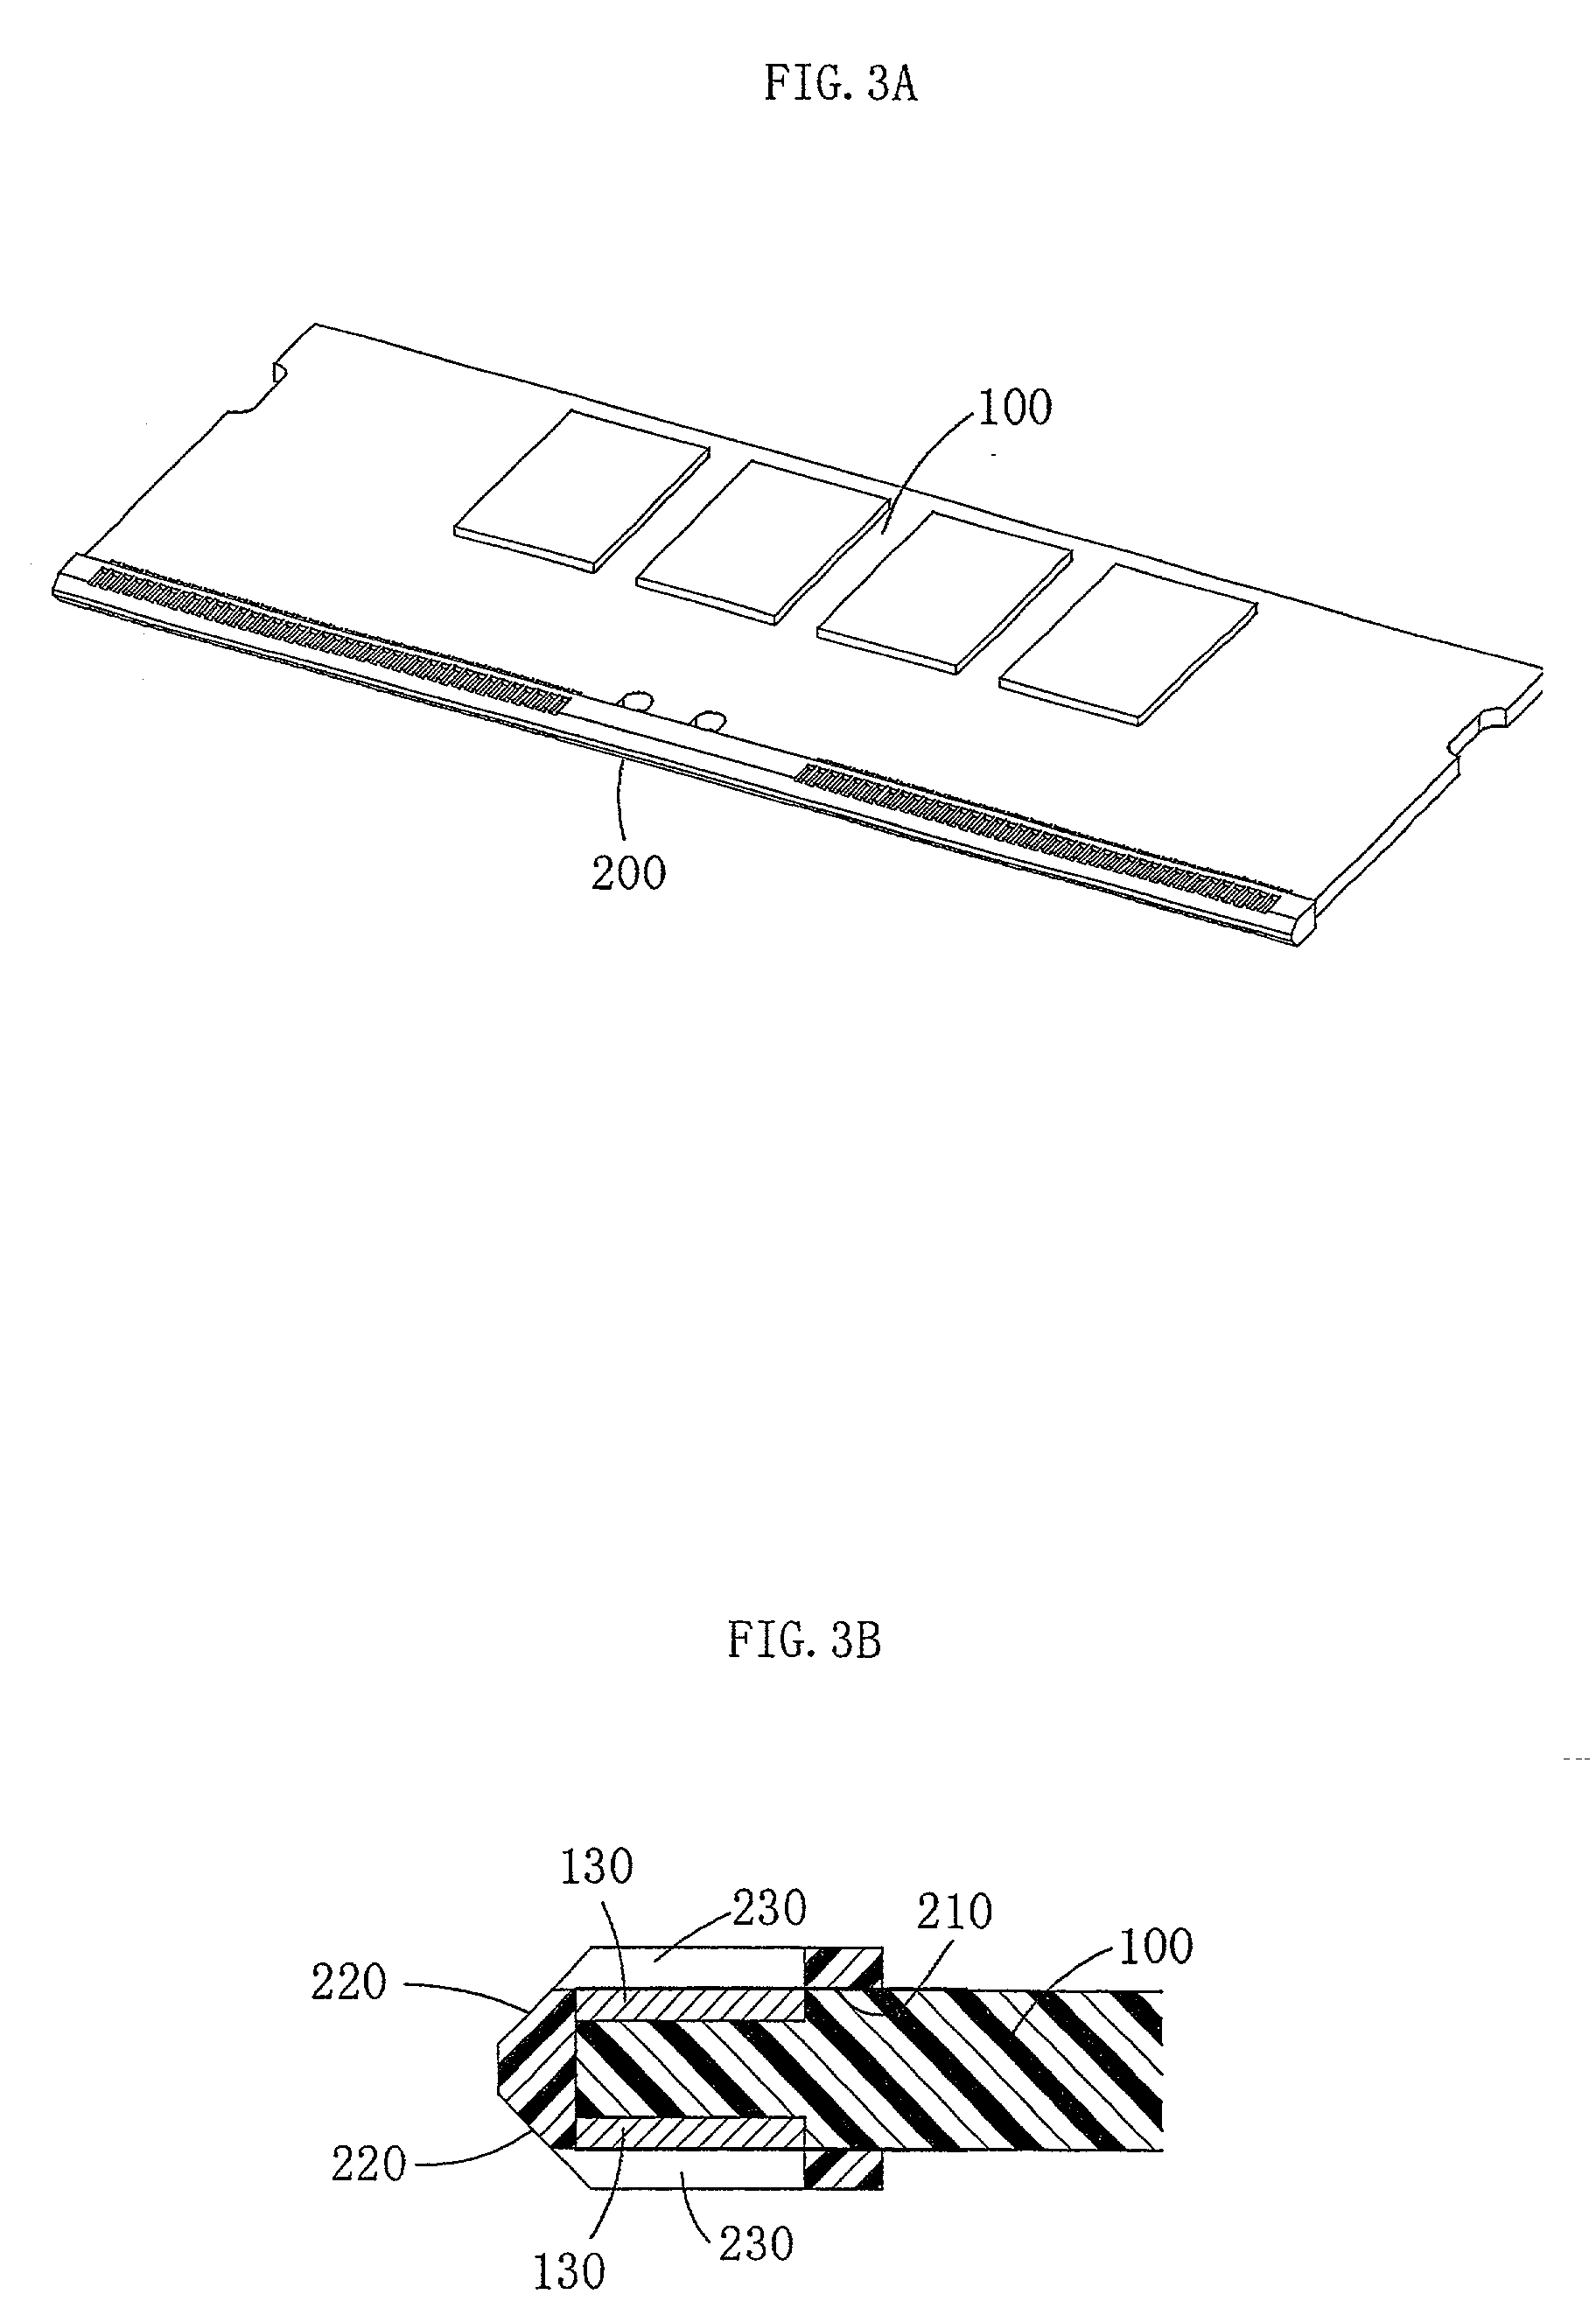 Cap and low insertion force connector for printed circuit board